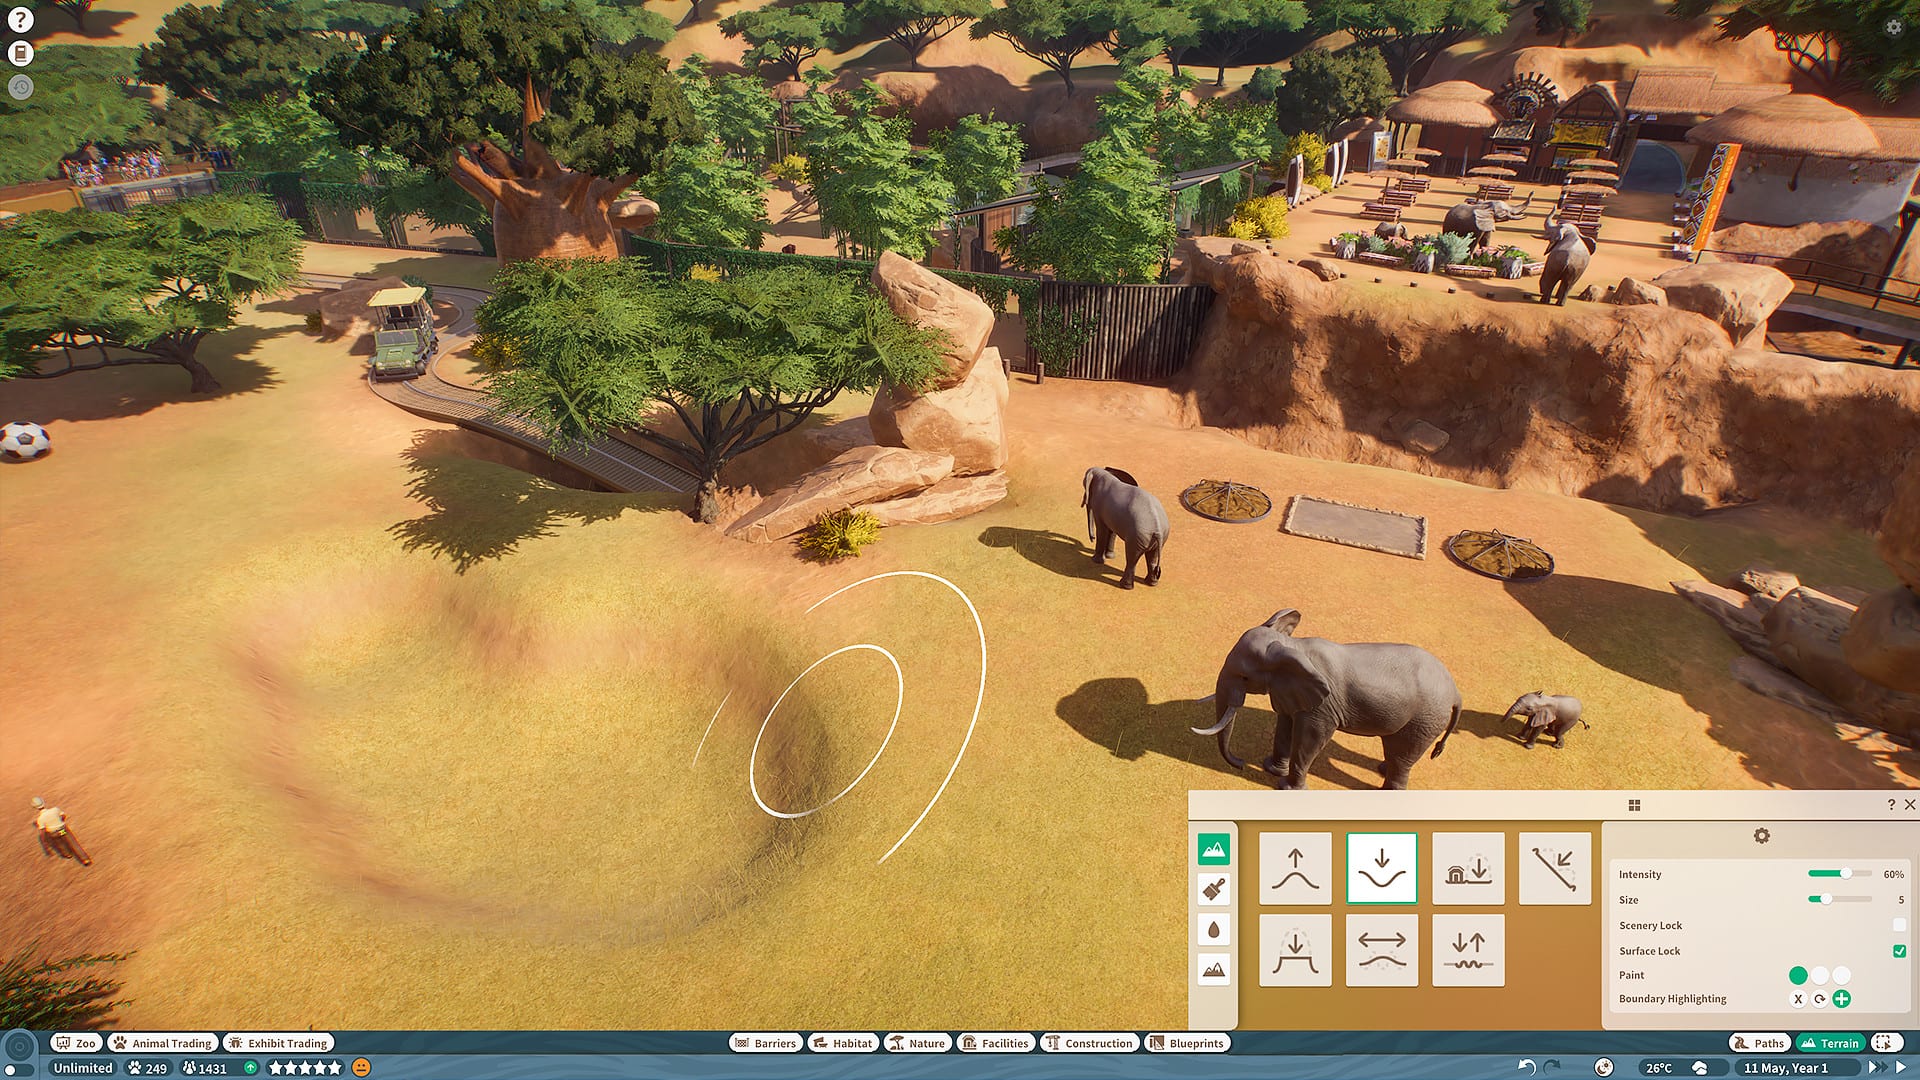 Planet Zoo: How to Visit Other Zoos